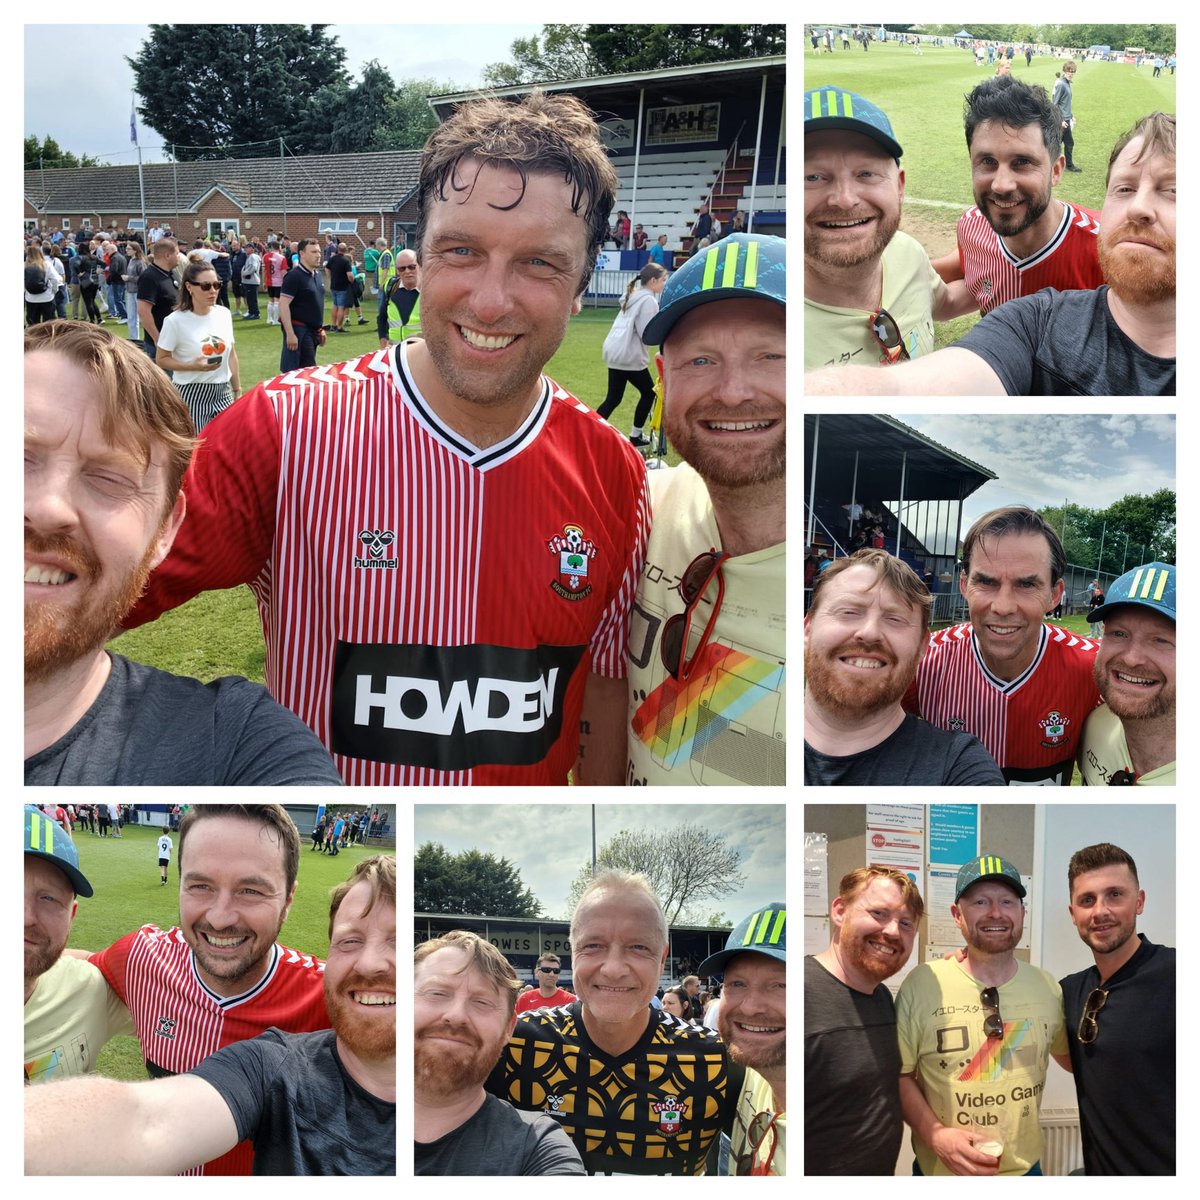 Brilliant day in the sun watching Saints Legends beat Isle of Wight Legends 5-2 at the home of @CowesSportsFC in support of @Newport_IW_FC.
@Ade_D83 and I got to meet & chat to some absolute Saints legends after the match. Real gents @SaintLambo07, @ShaneLong7 & @maiktaylor1